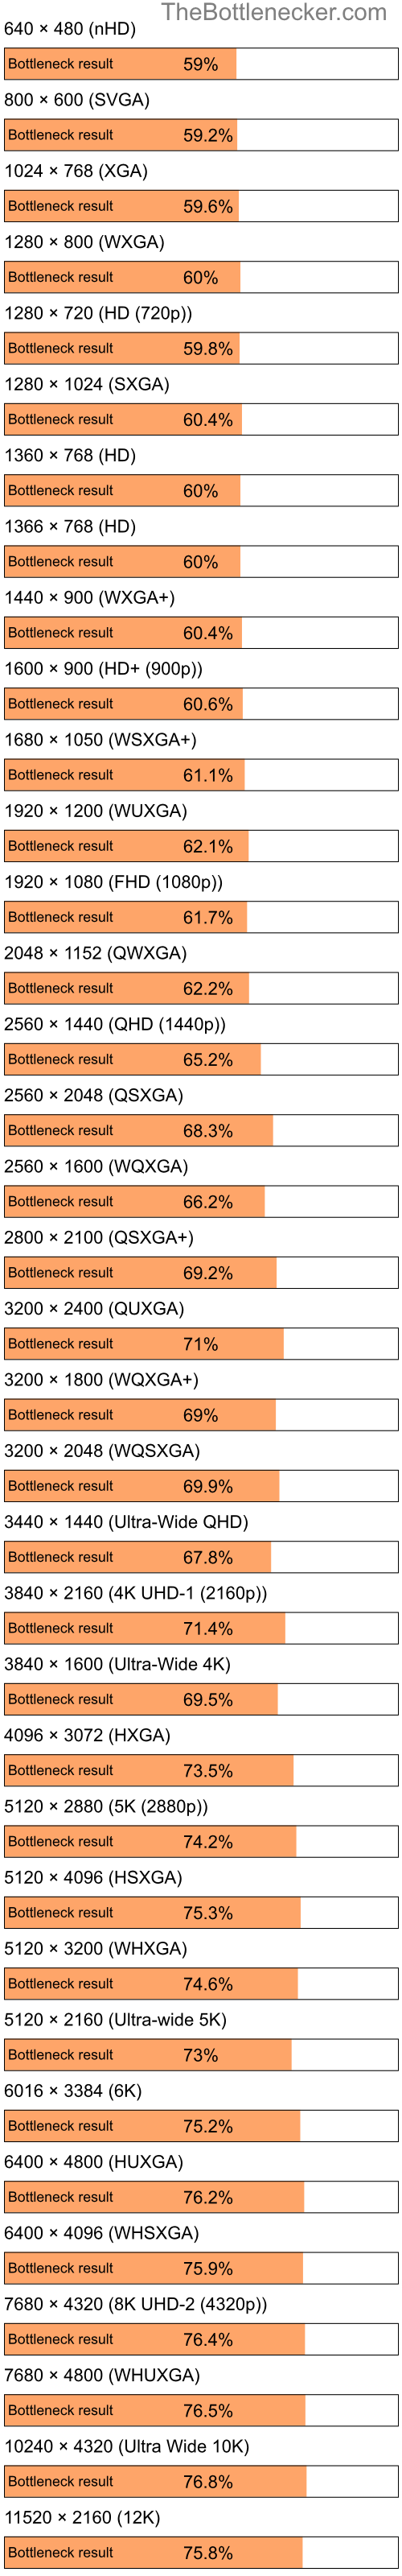 Bottleneck results by resolution for Intel Pentium 4 and AMD Mobility Radeon 4100 in Processor Intense Tasks